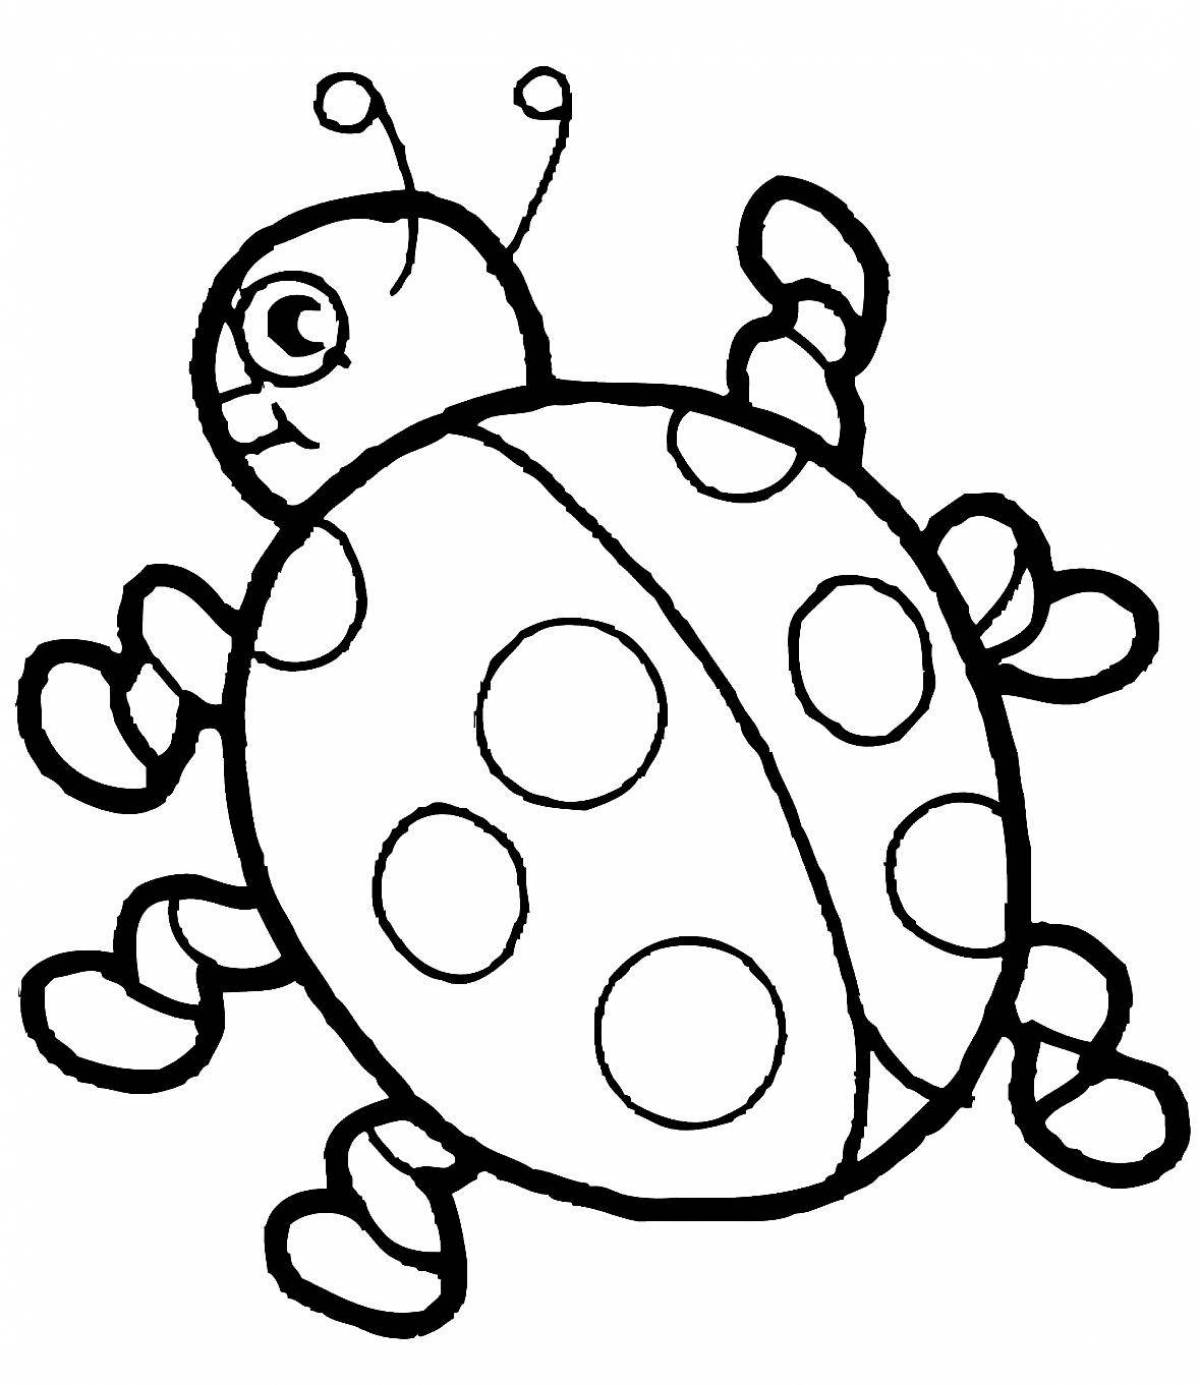 Great ladybug coloring book for 4-5 year olds